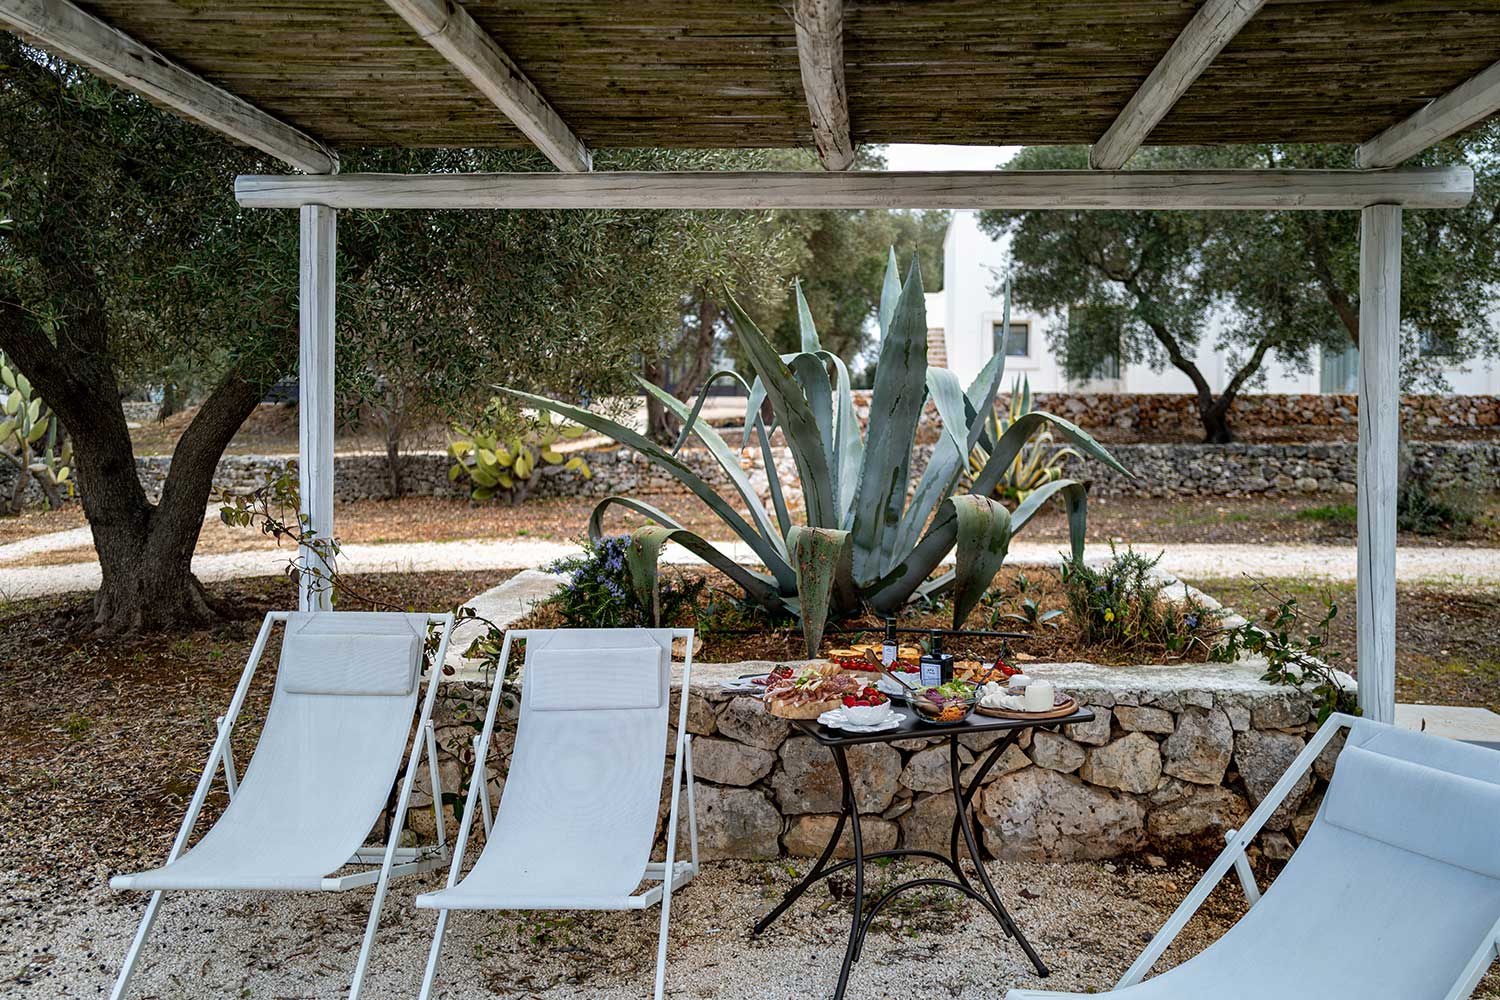 Aperitif amidst the Olive Trees